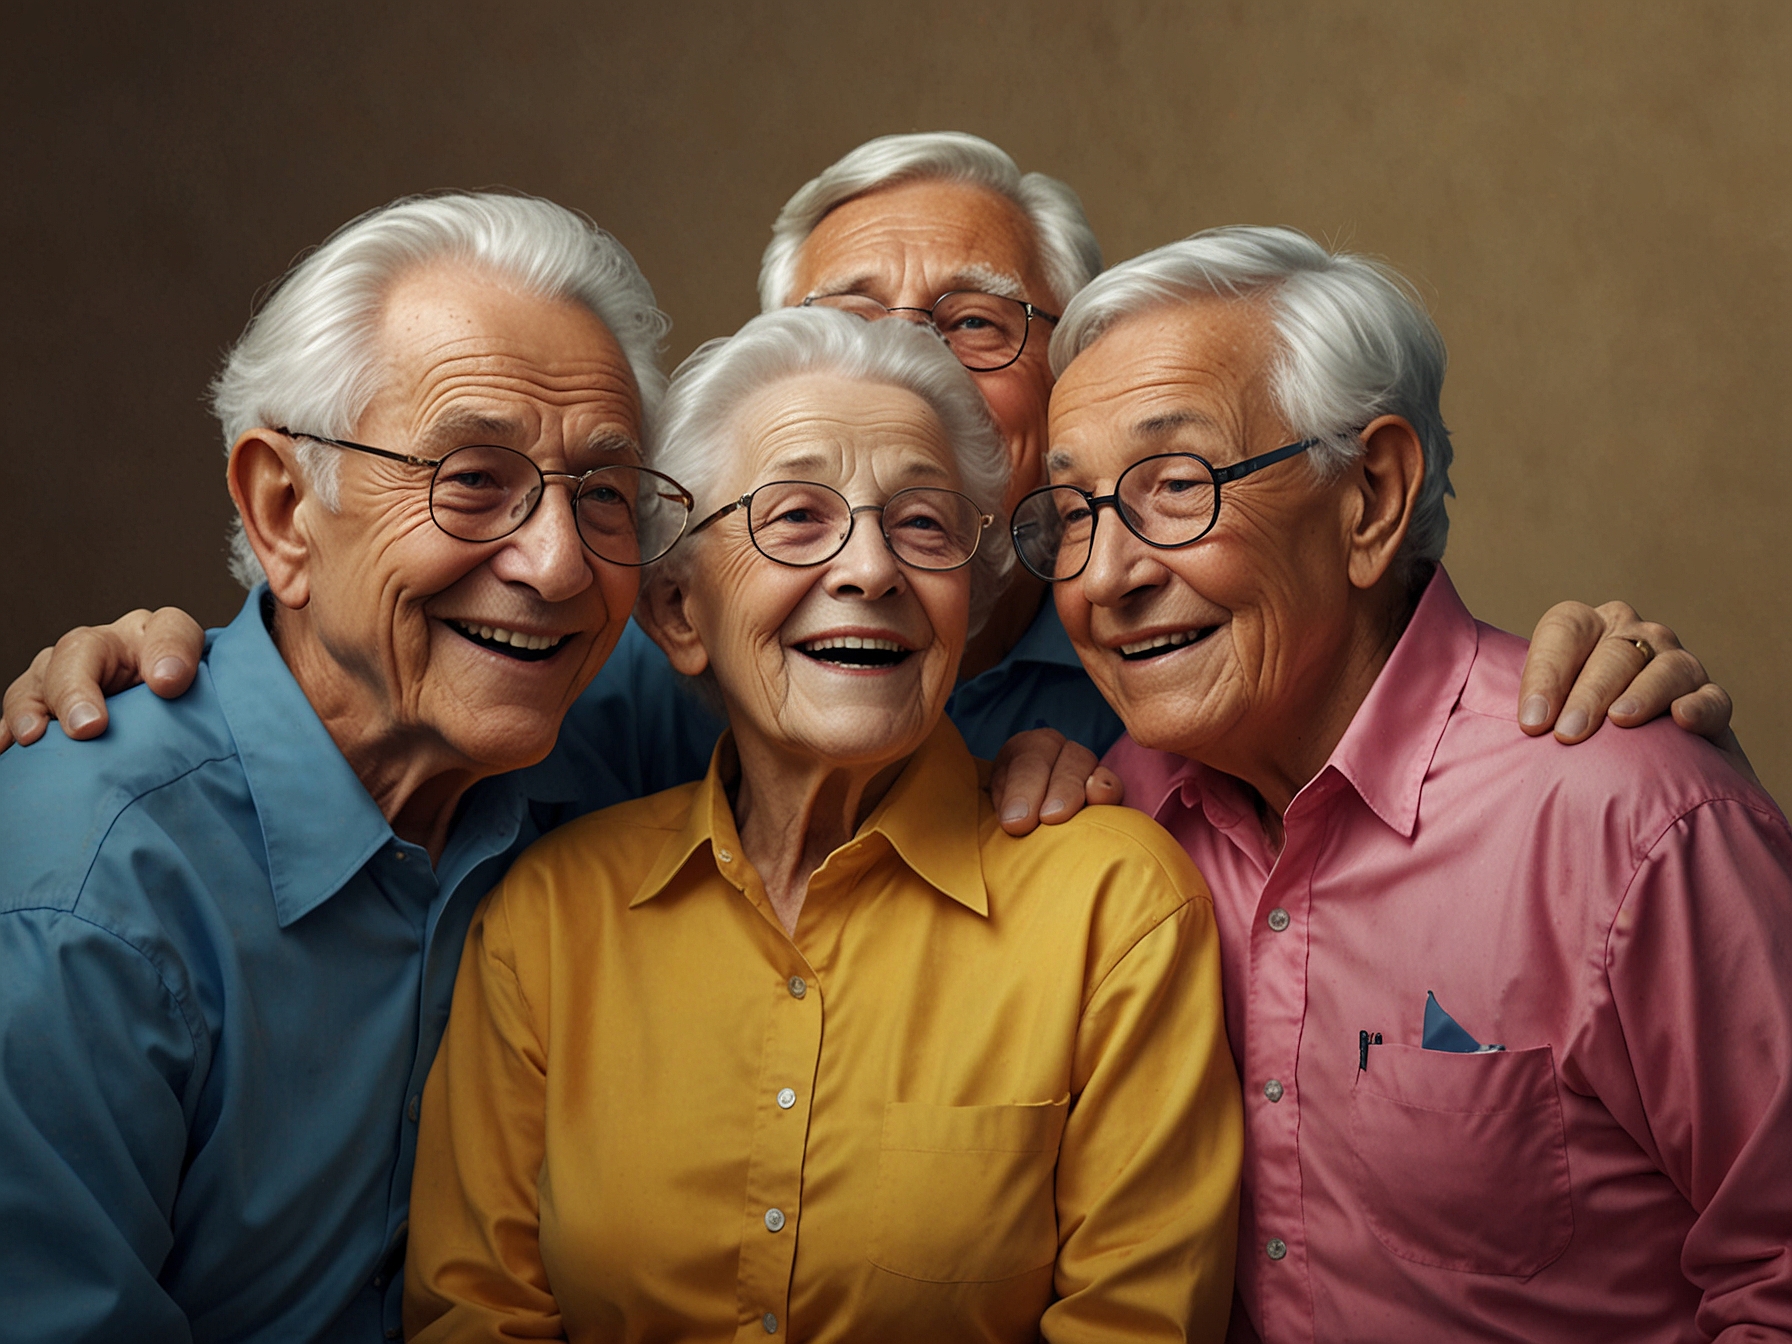 Elderly members of the 'Golden Gays' huddle together, symbolizing their strong camaraderie and unity as they dream of securing a permanent home and fostering acceptance in society.